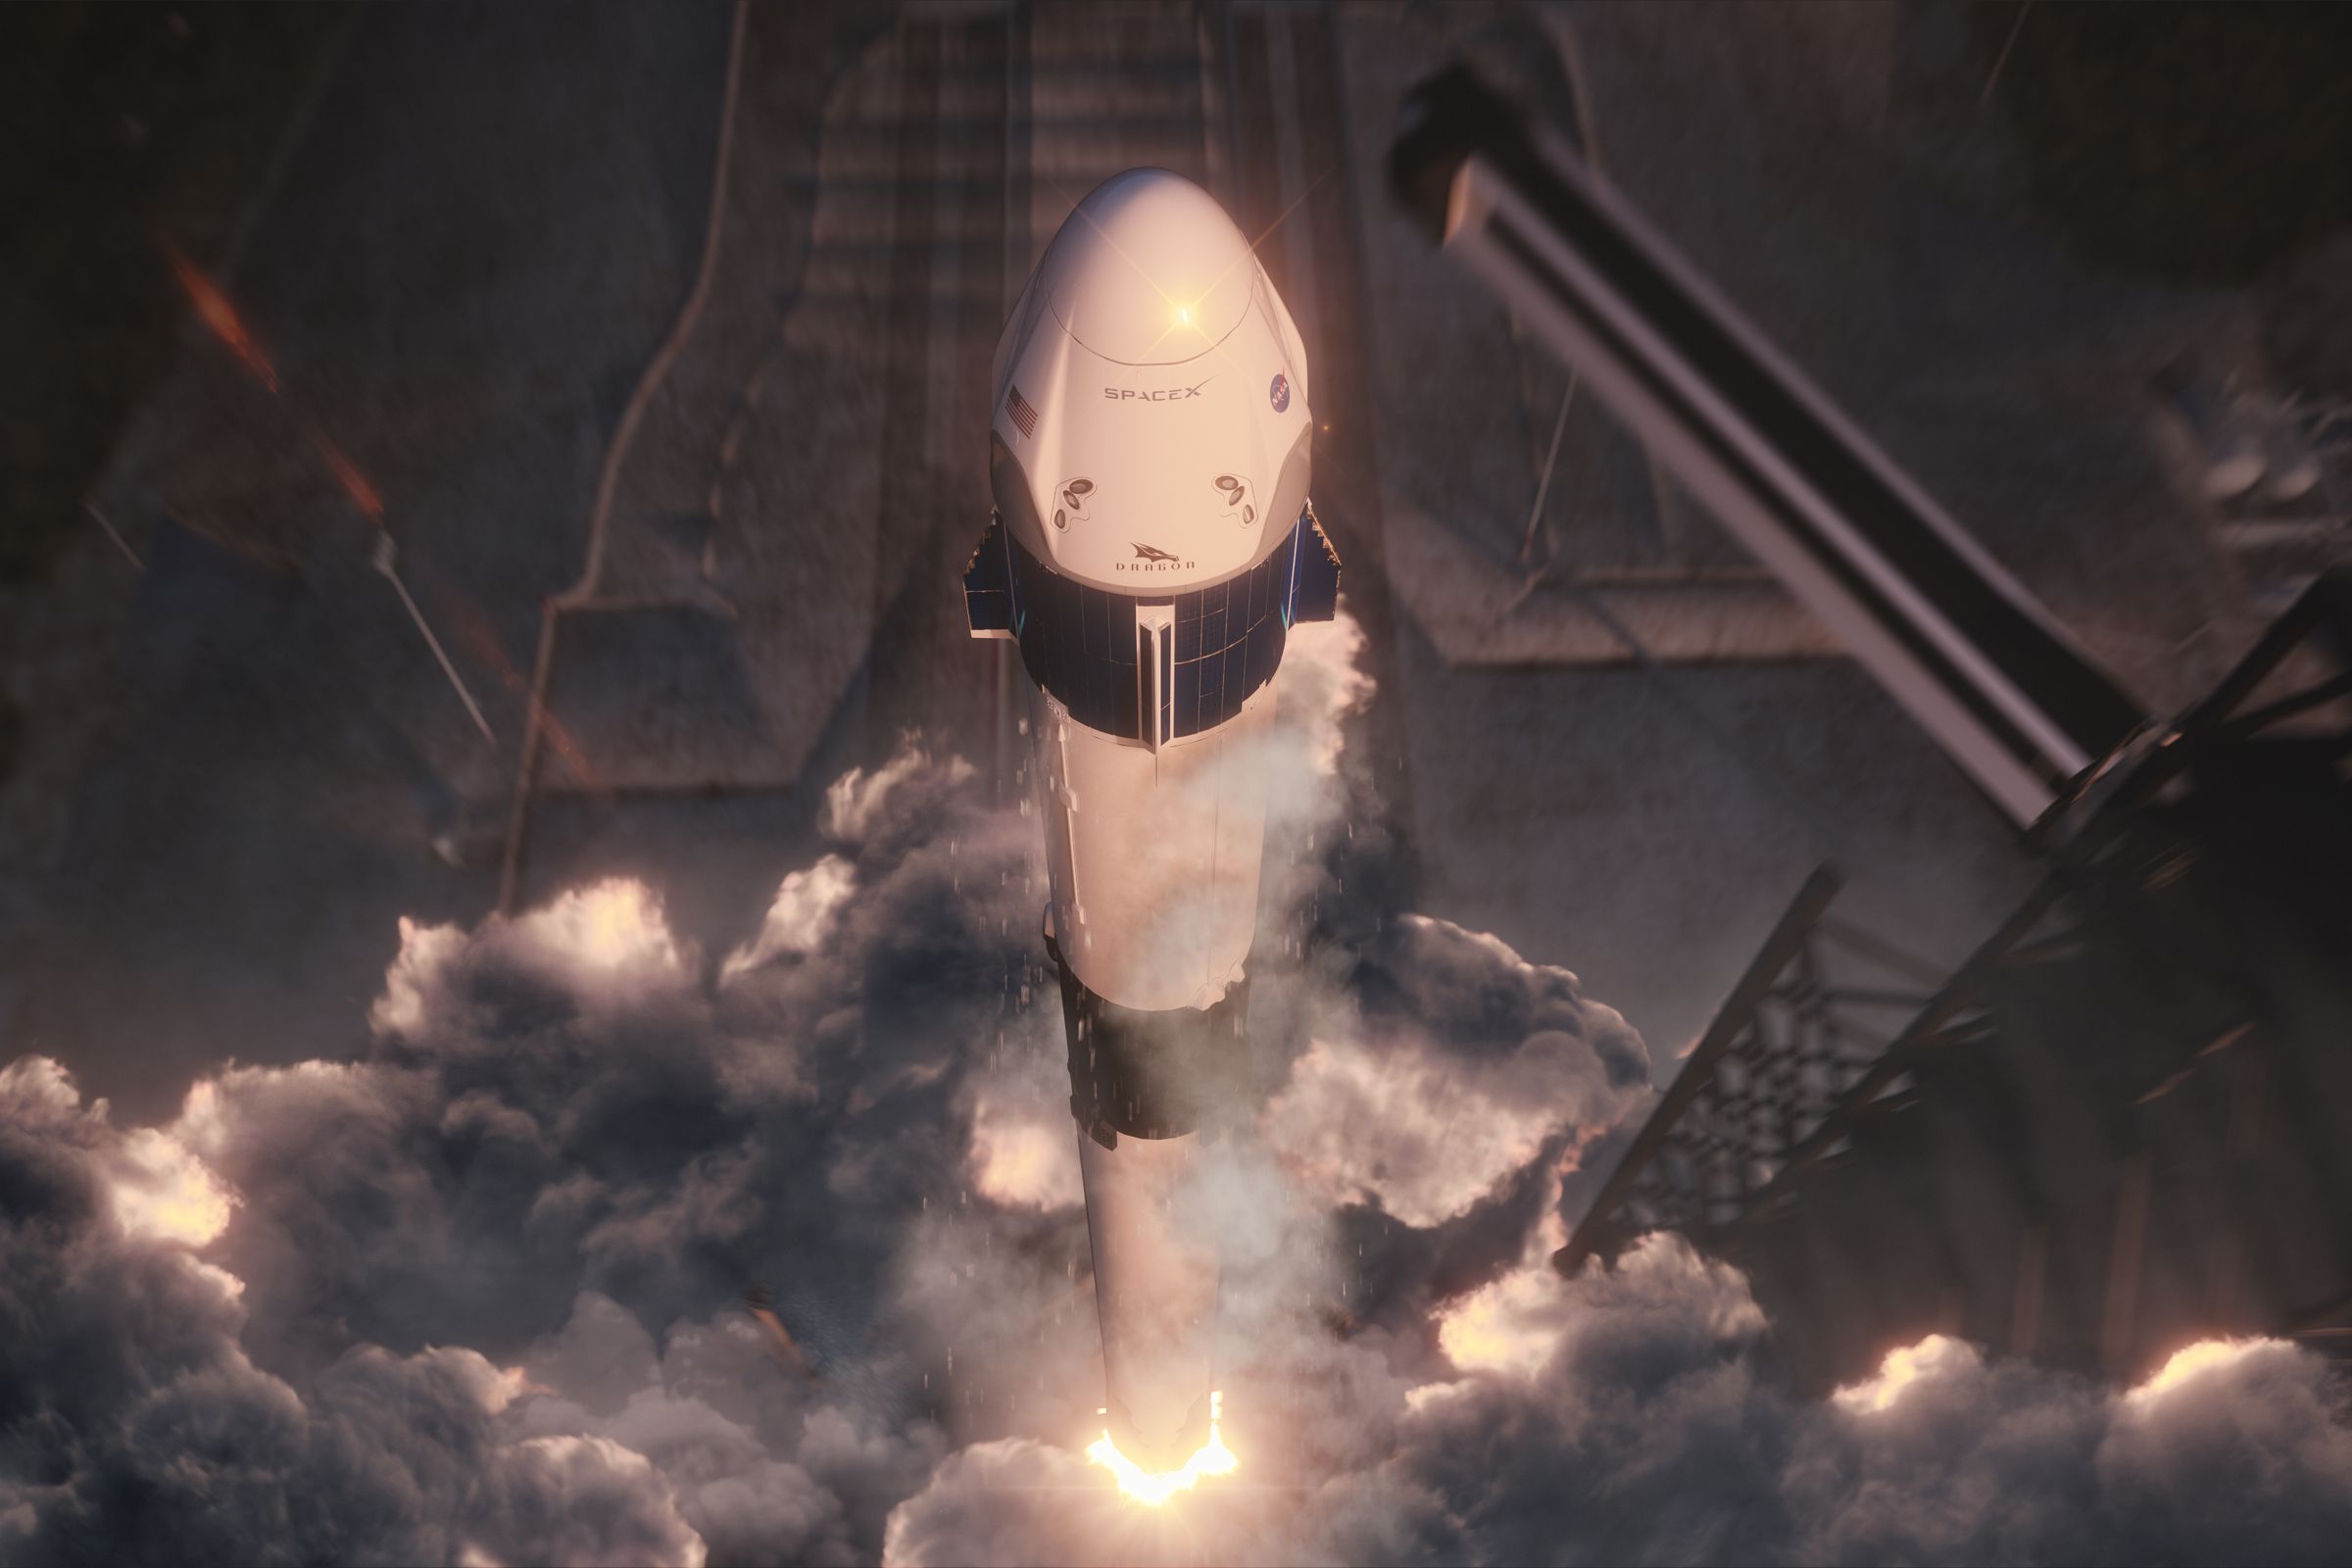 An artistic rendering of SpaceX’s Crew Dragon launching on a Falcon 9 rocket